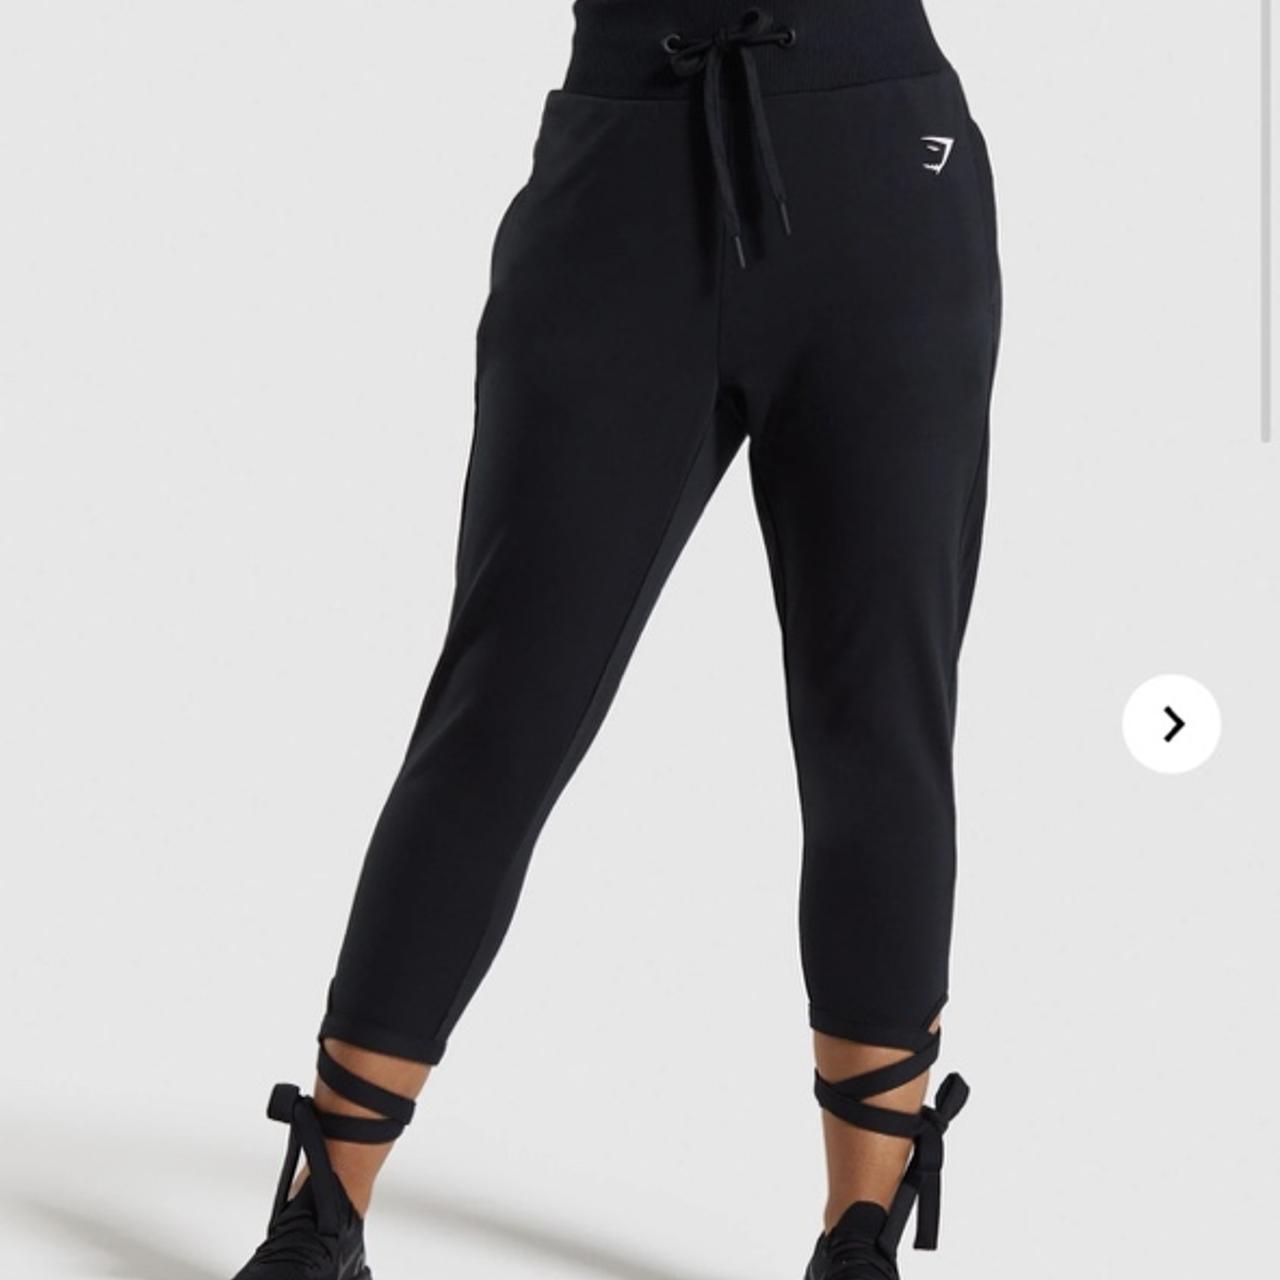 Ark High Waisted Jogger in Black , Size Small never